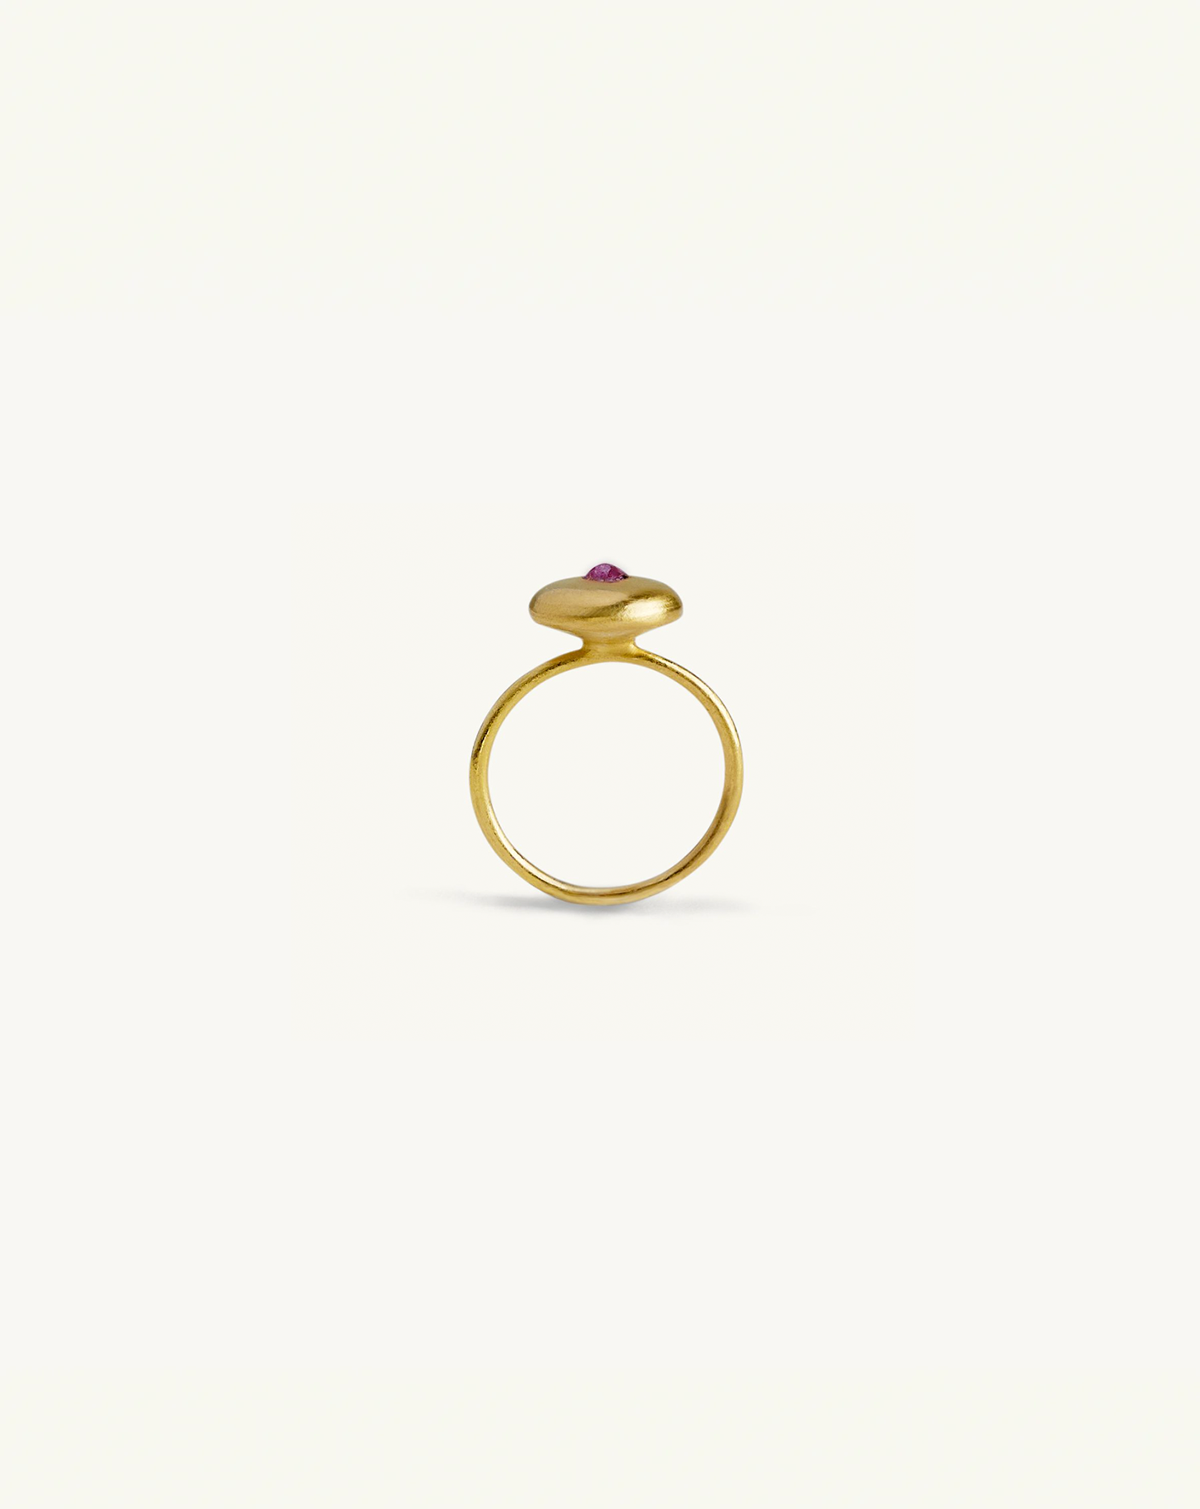 Product image of the i seira gold pod ring with ruby gemstone